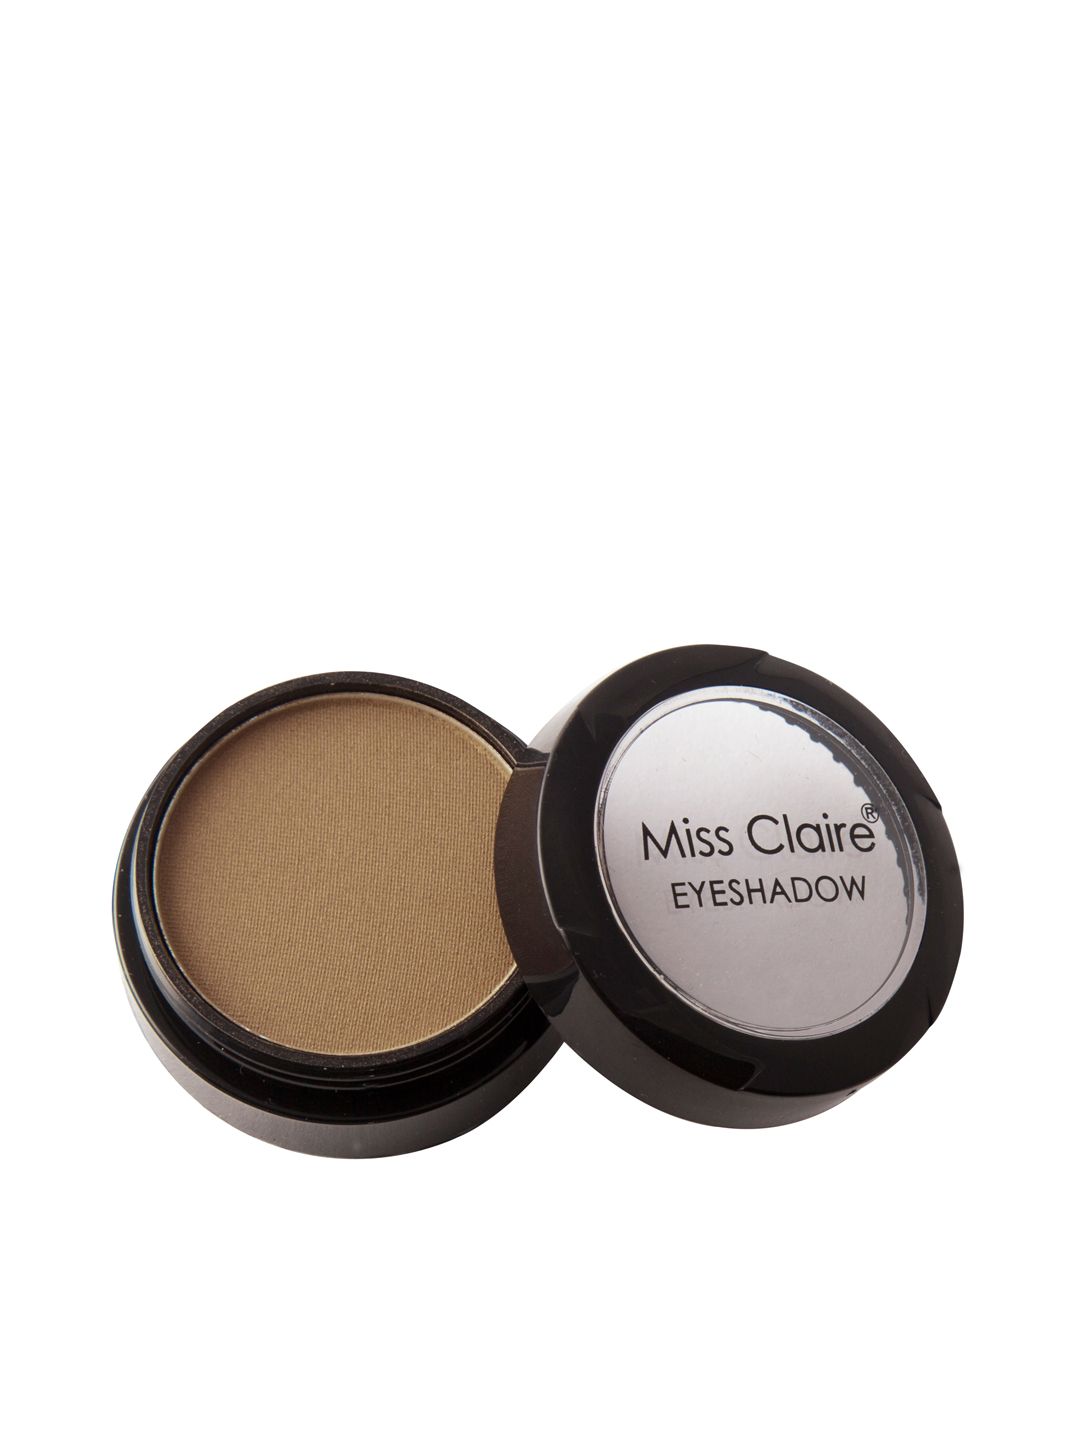 Miss Claire 0215 Single Eyeshadow Price in India